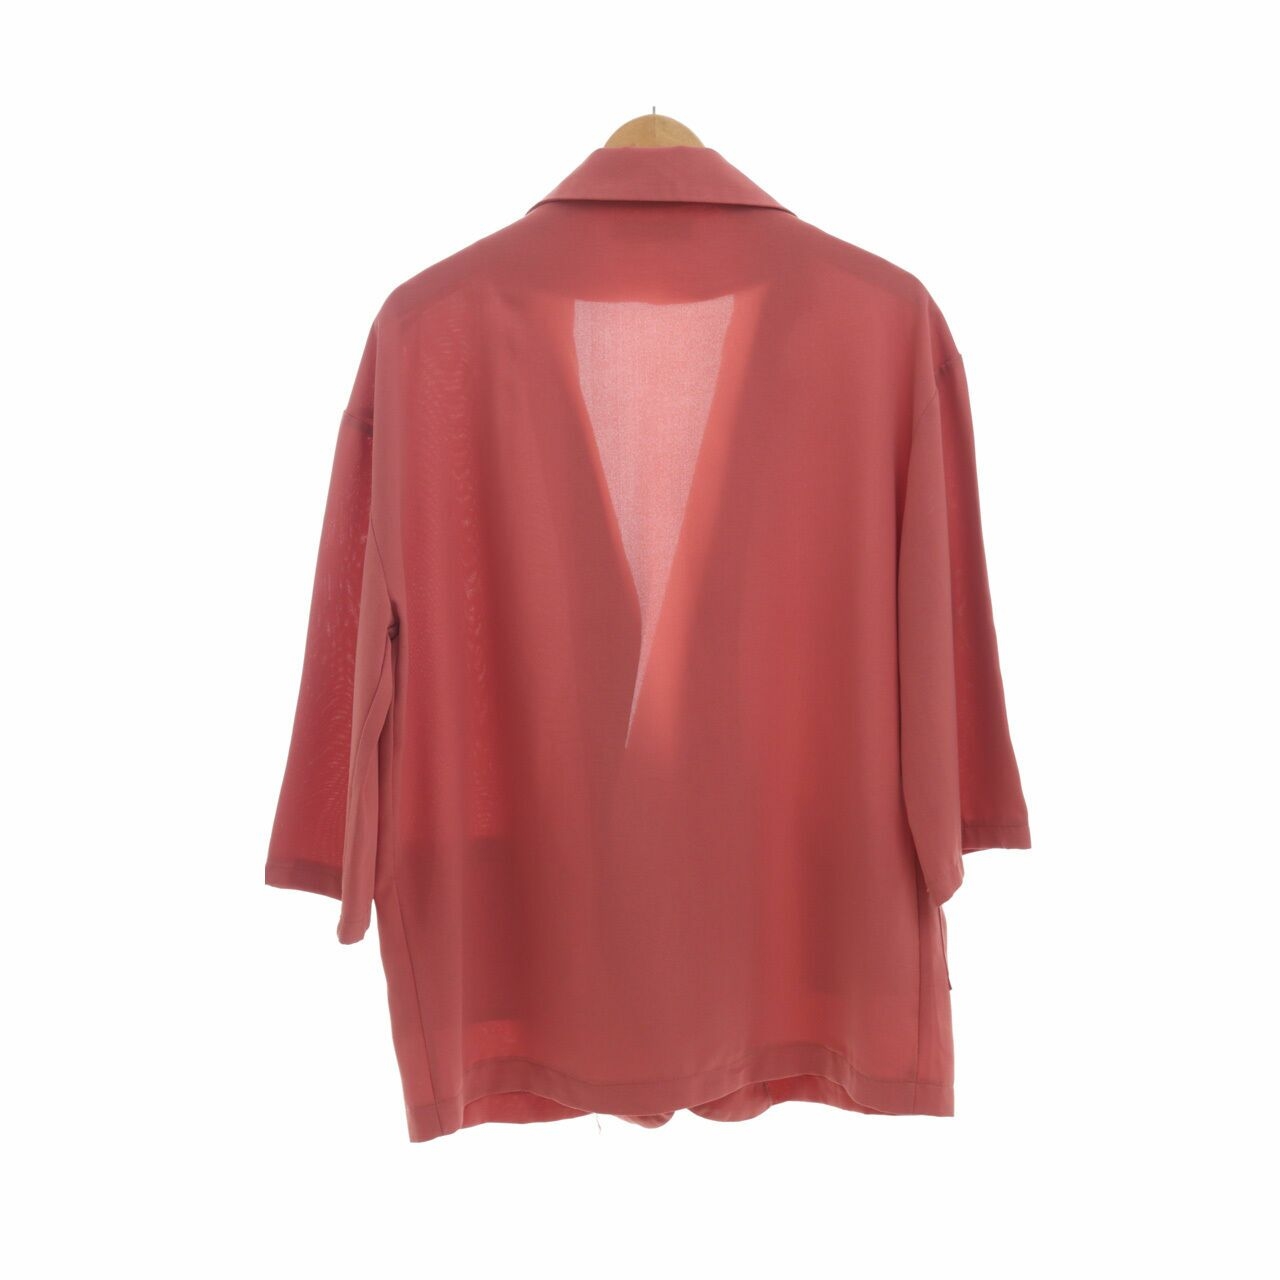 Herspot Pink Coral Outerwear